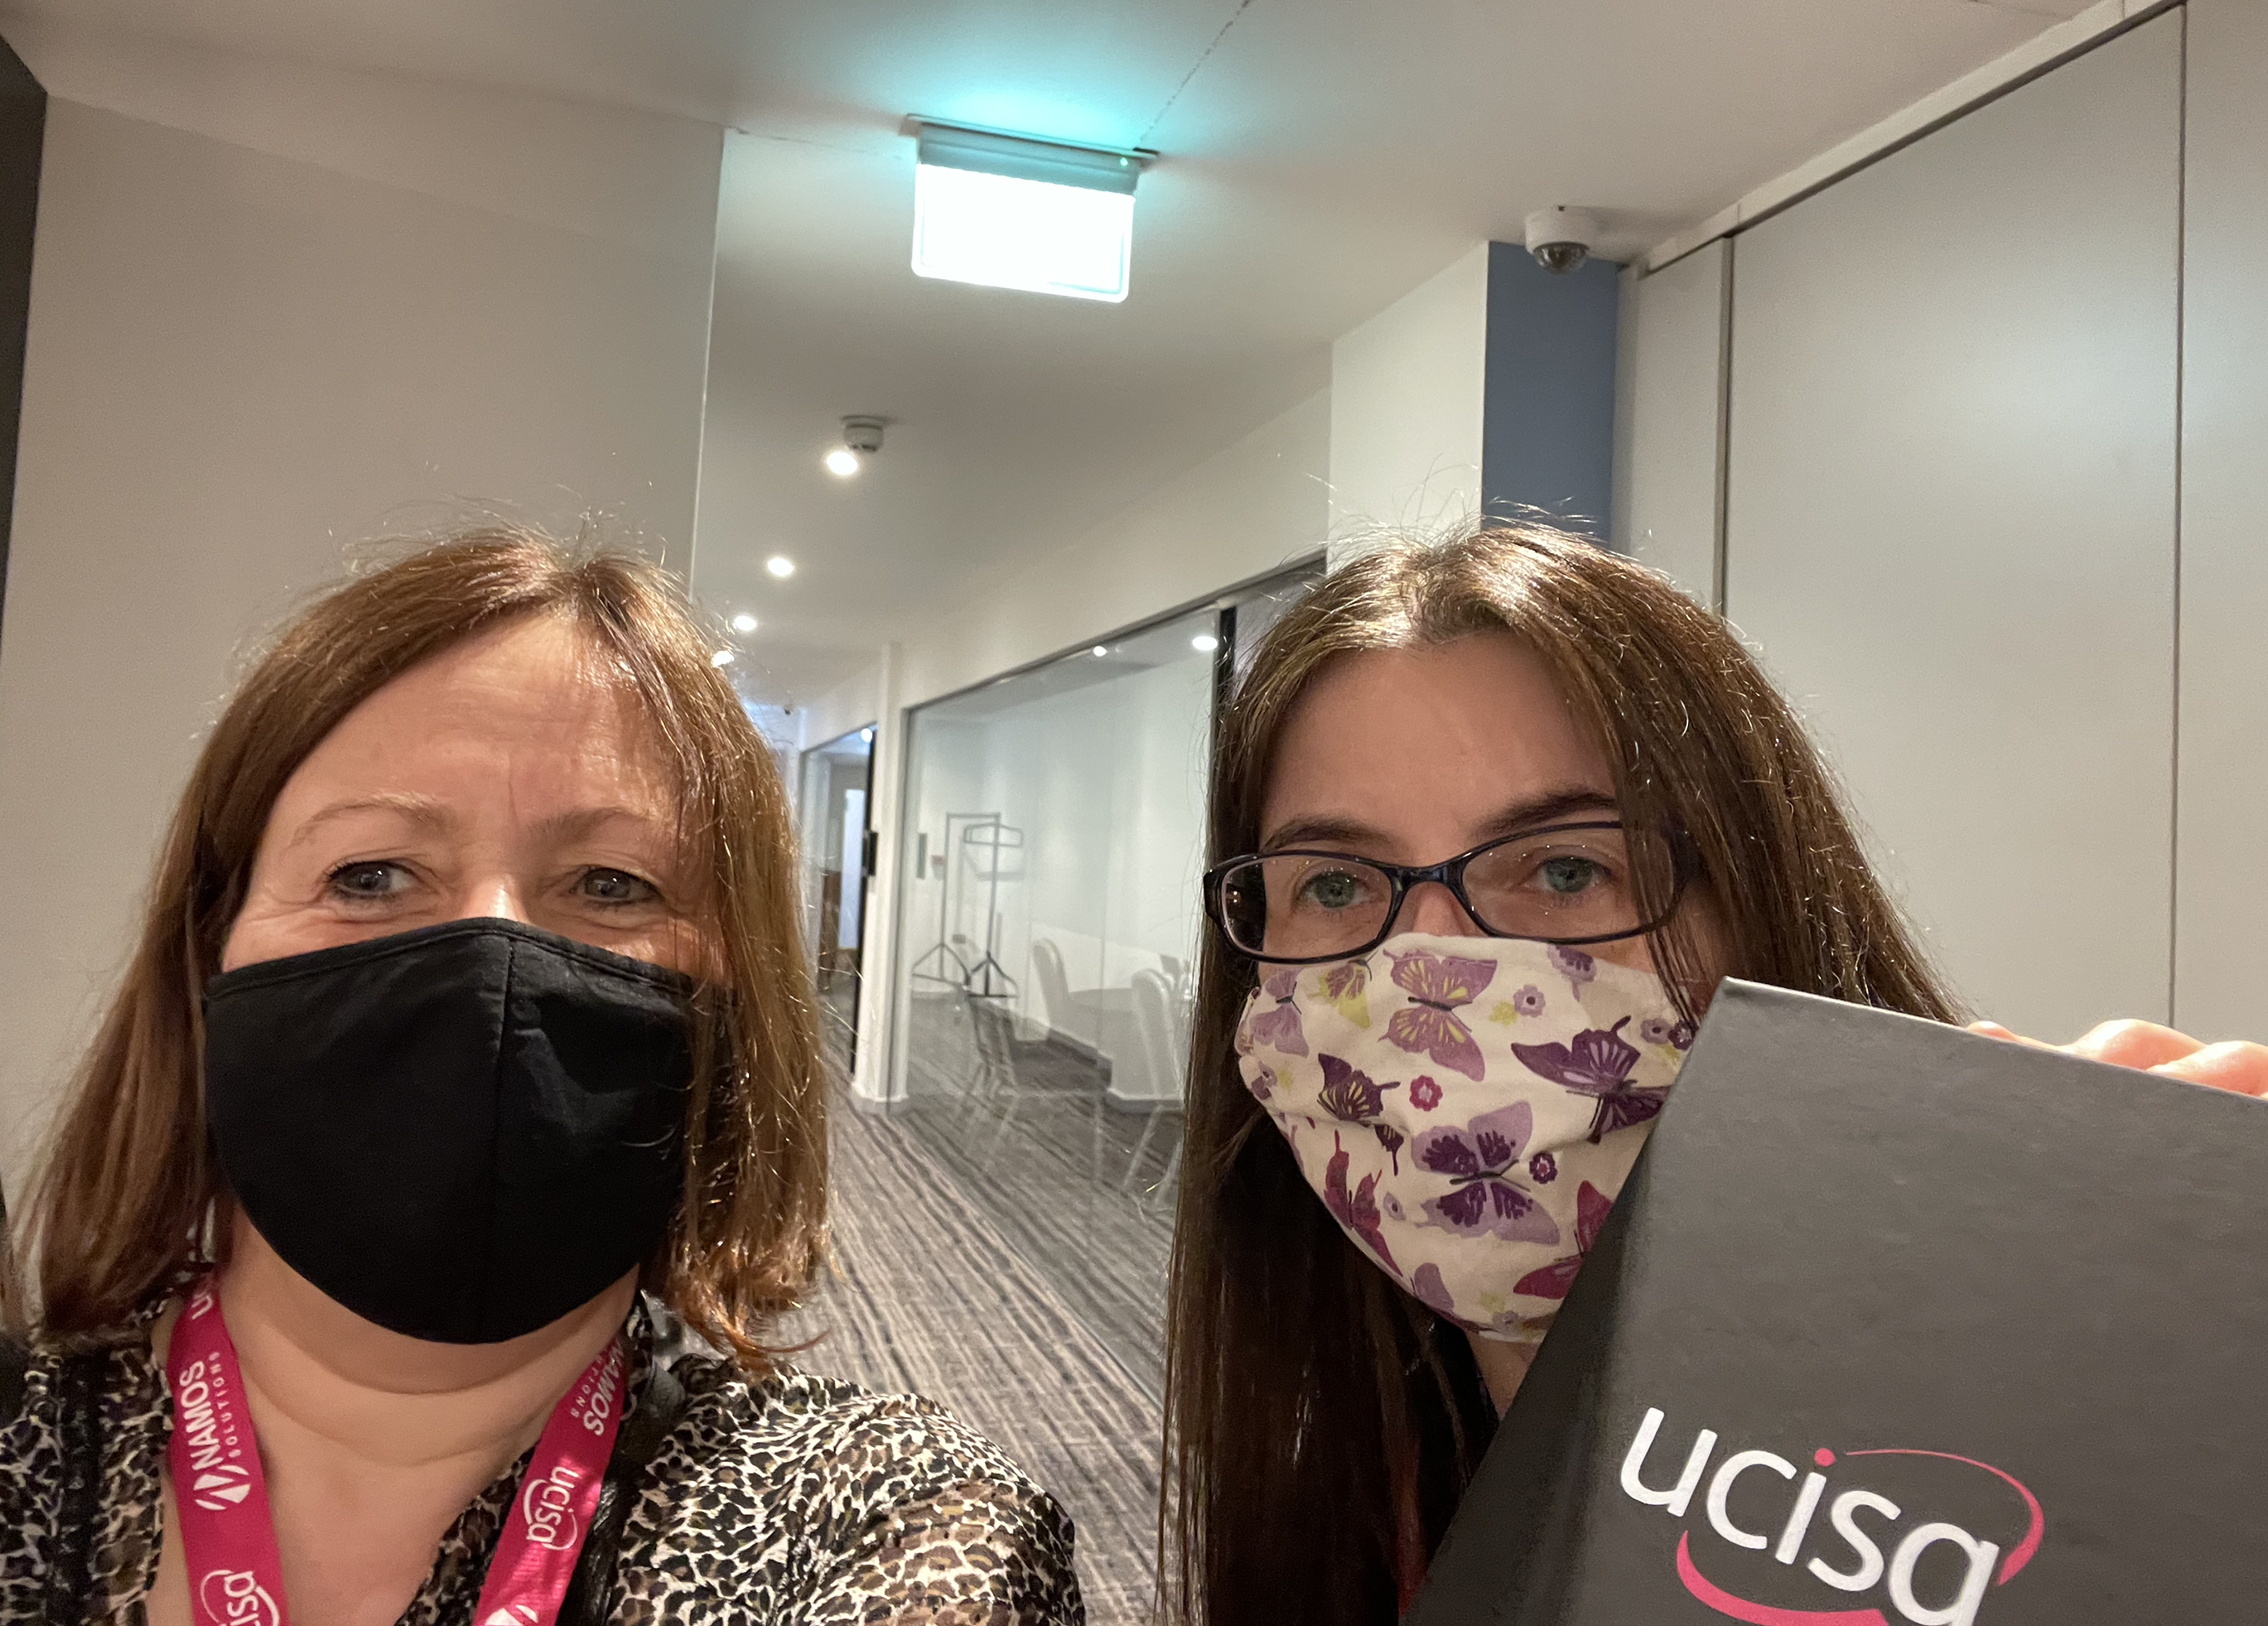 Jackie (left) and Karen (right) at UCISA conference in Birmingham